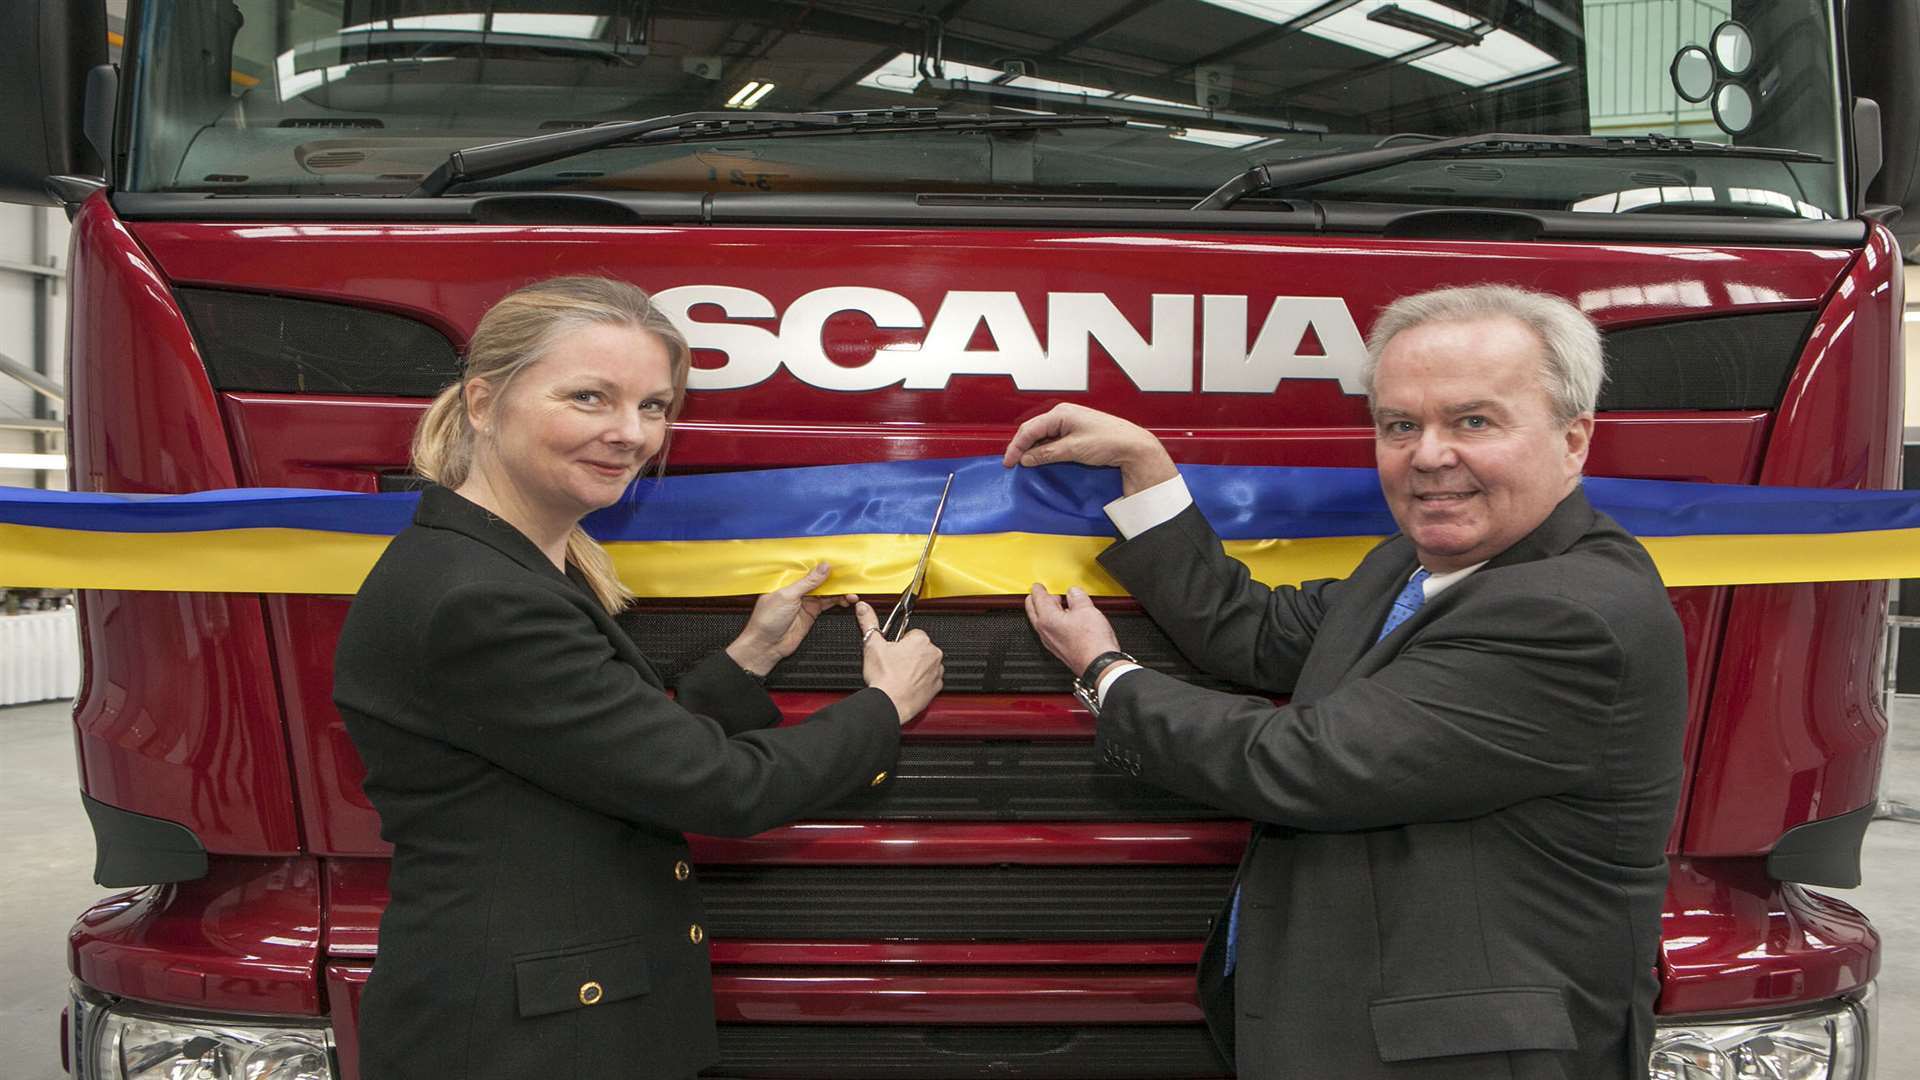 Swedish ambassador Her Excellency Nicola Clase opens the Scania Maidstone centre with Great Britain managing director Claes Jacobsson